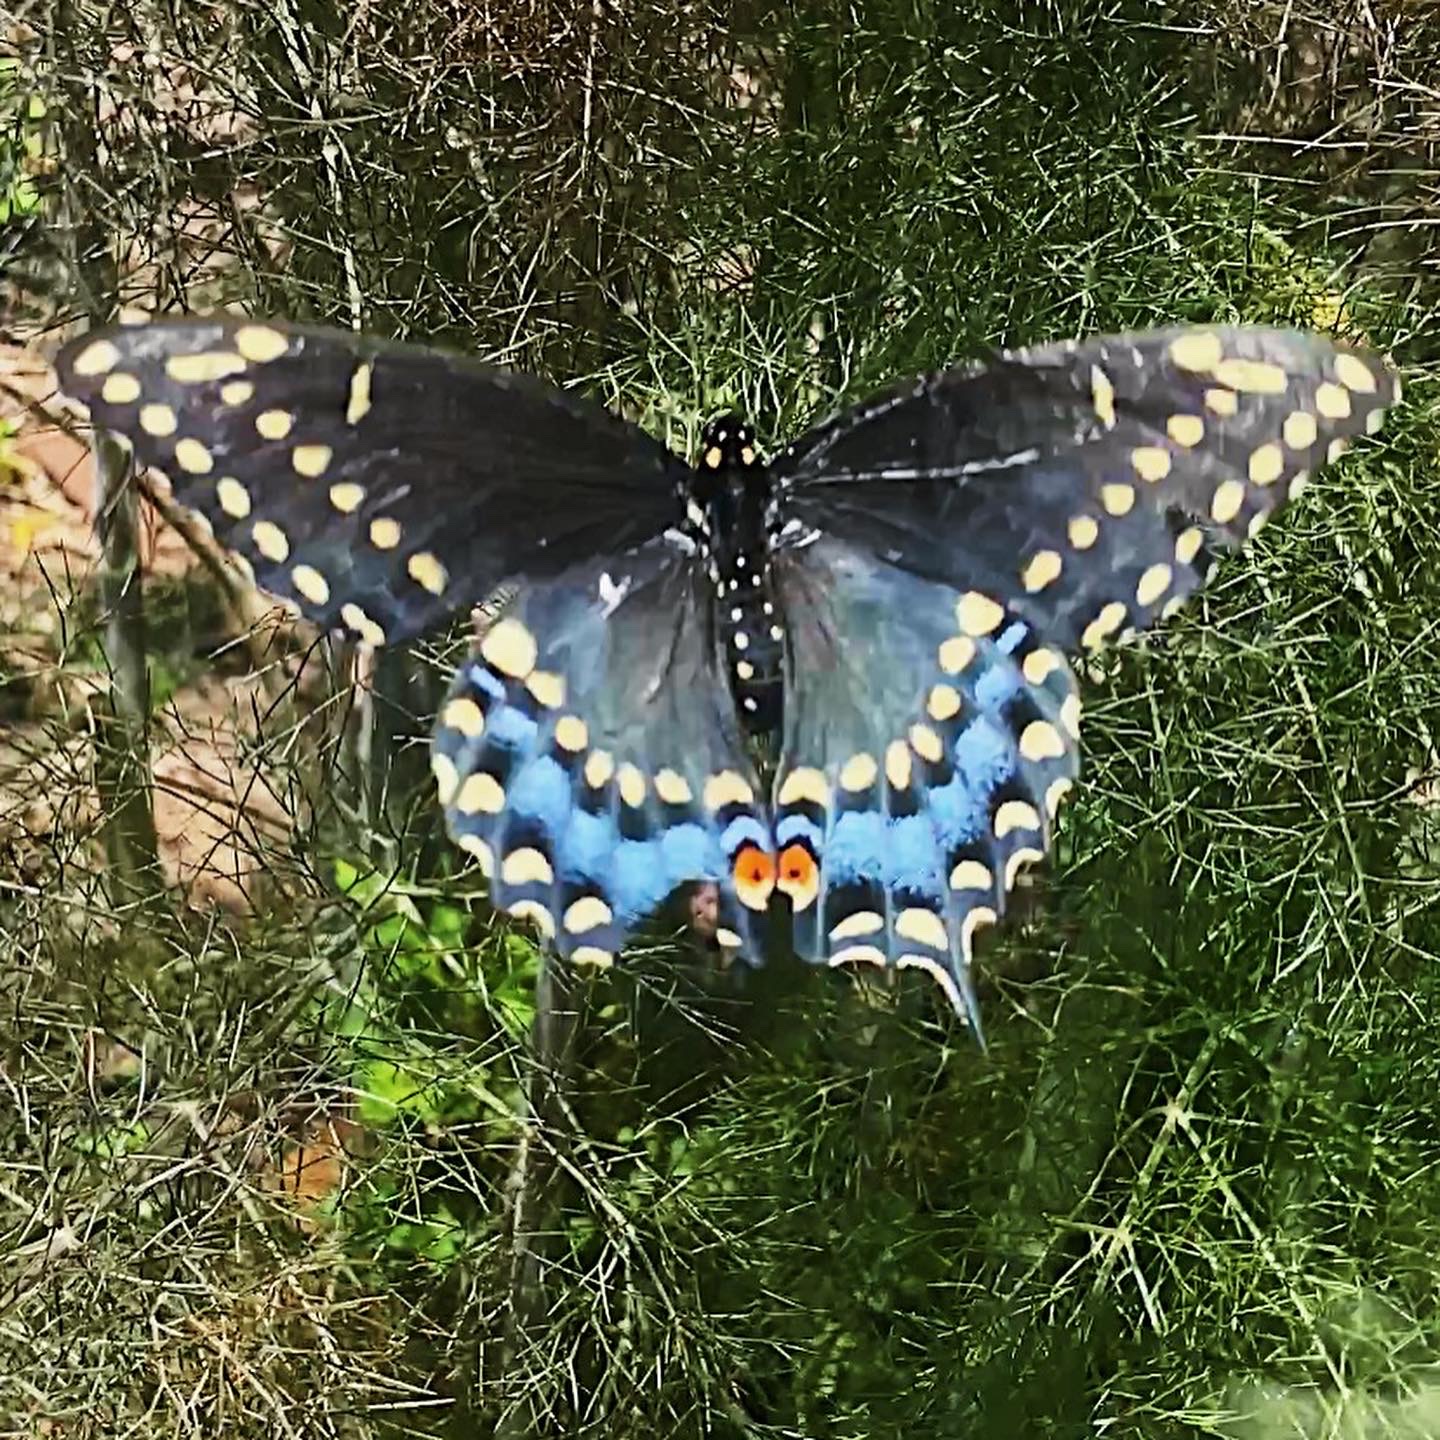 A black swallowtail butterfly, with its brilliant black and blue wings with yellow spots, rests on the grass.